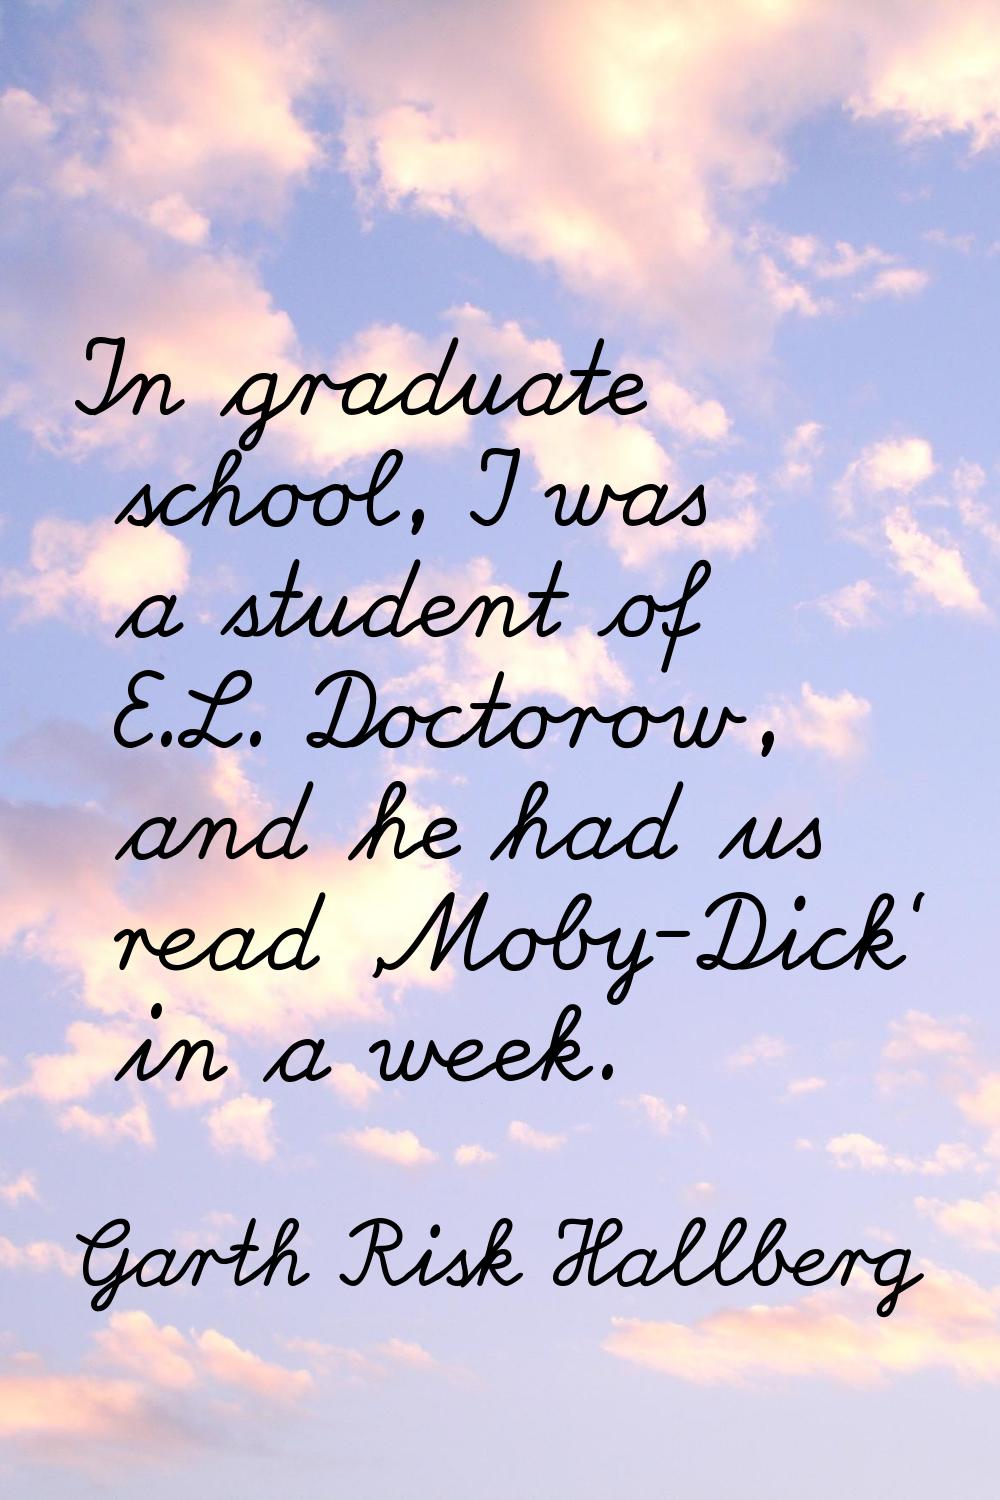 In graduate school, I was a student of E.L. Doctorow, and he had us read 'Moby-Dick' in a week.